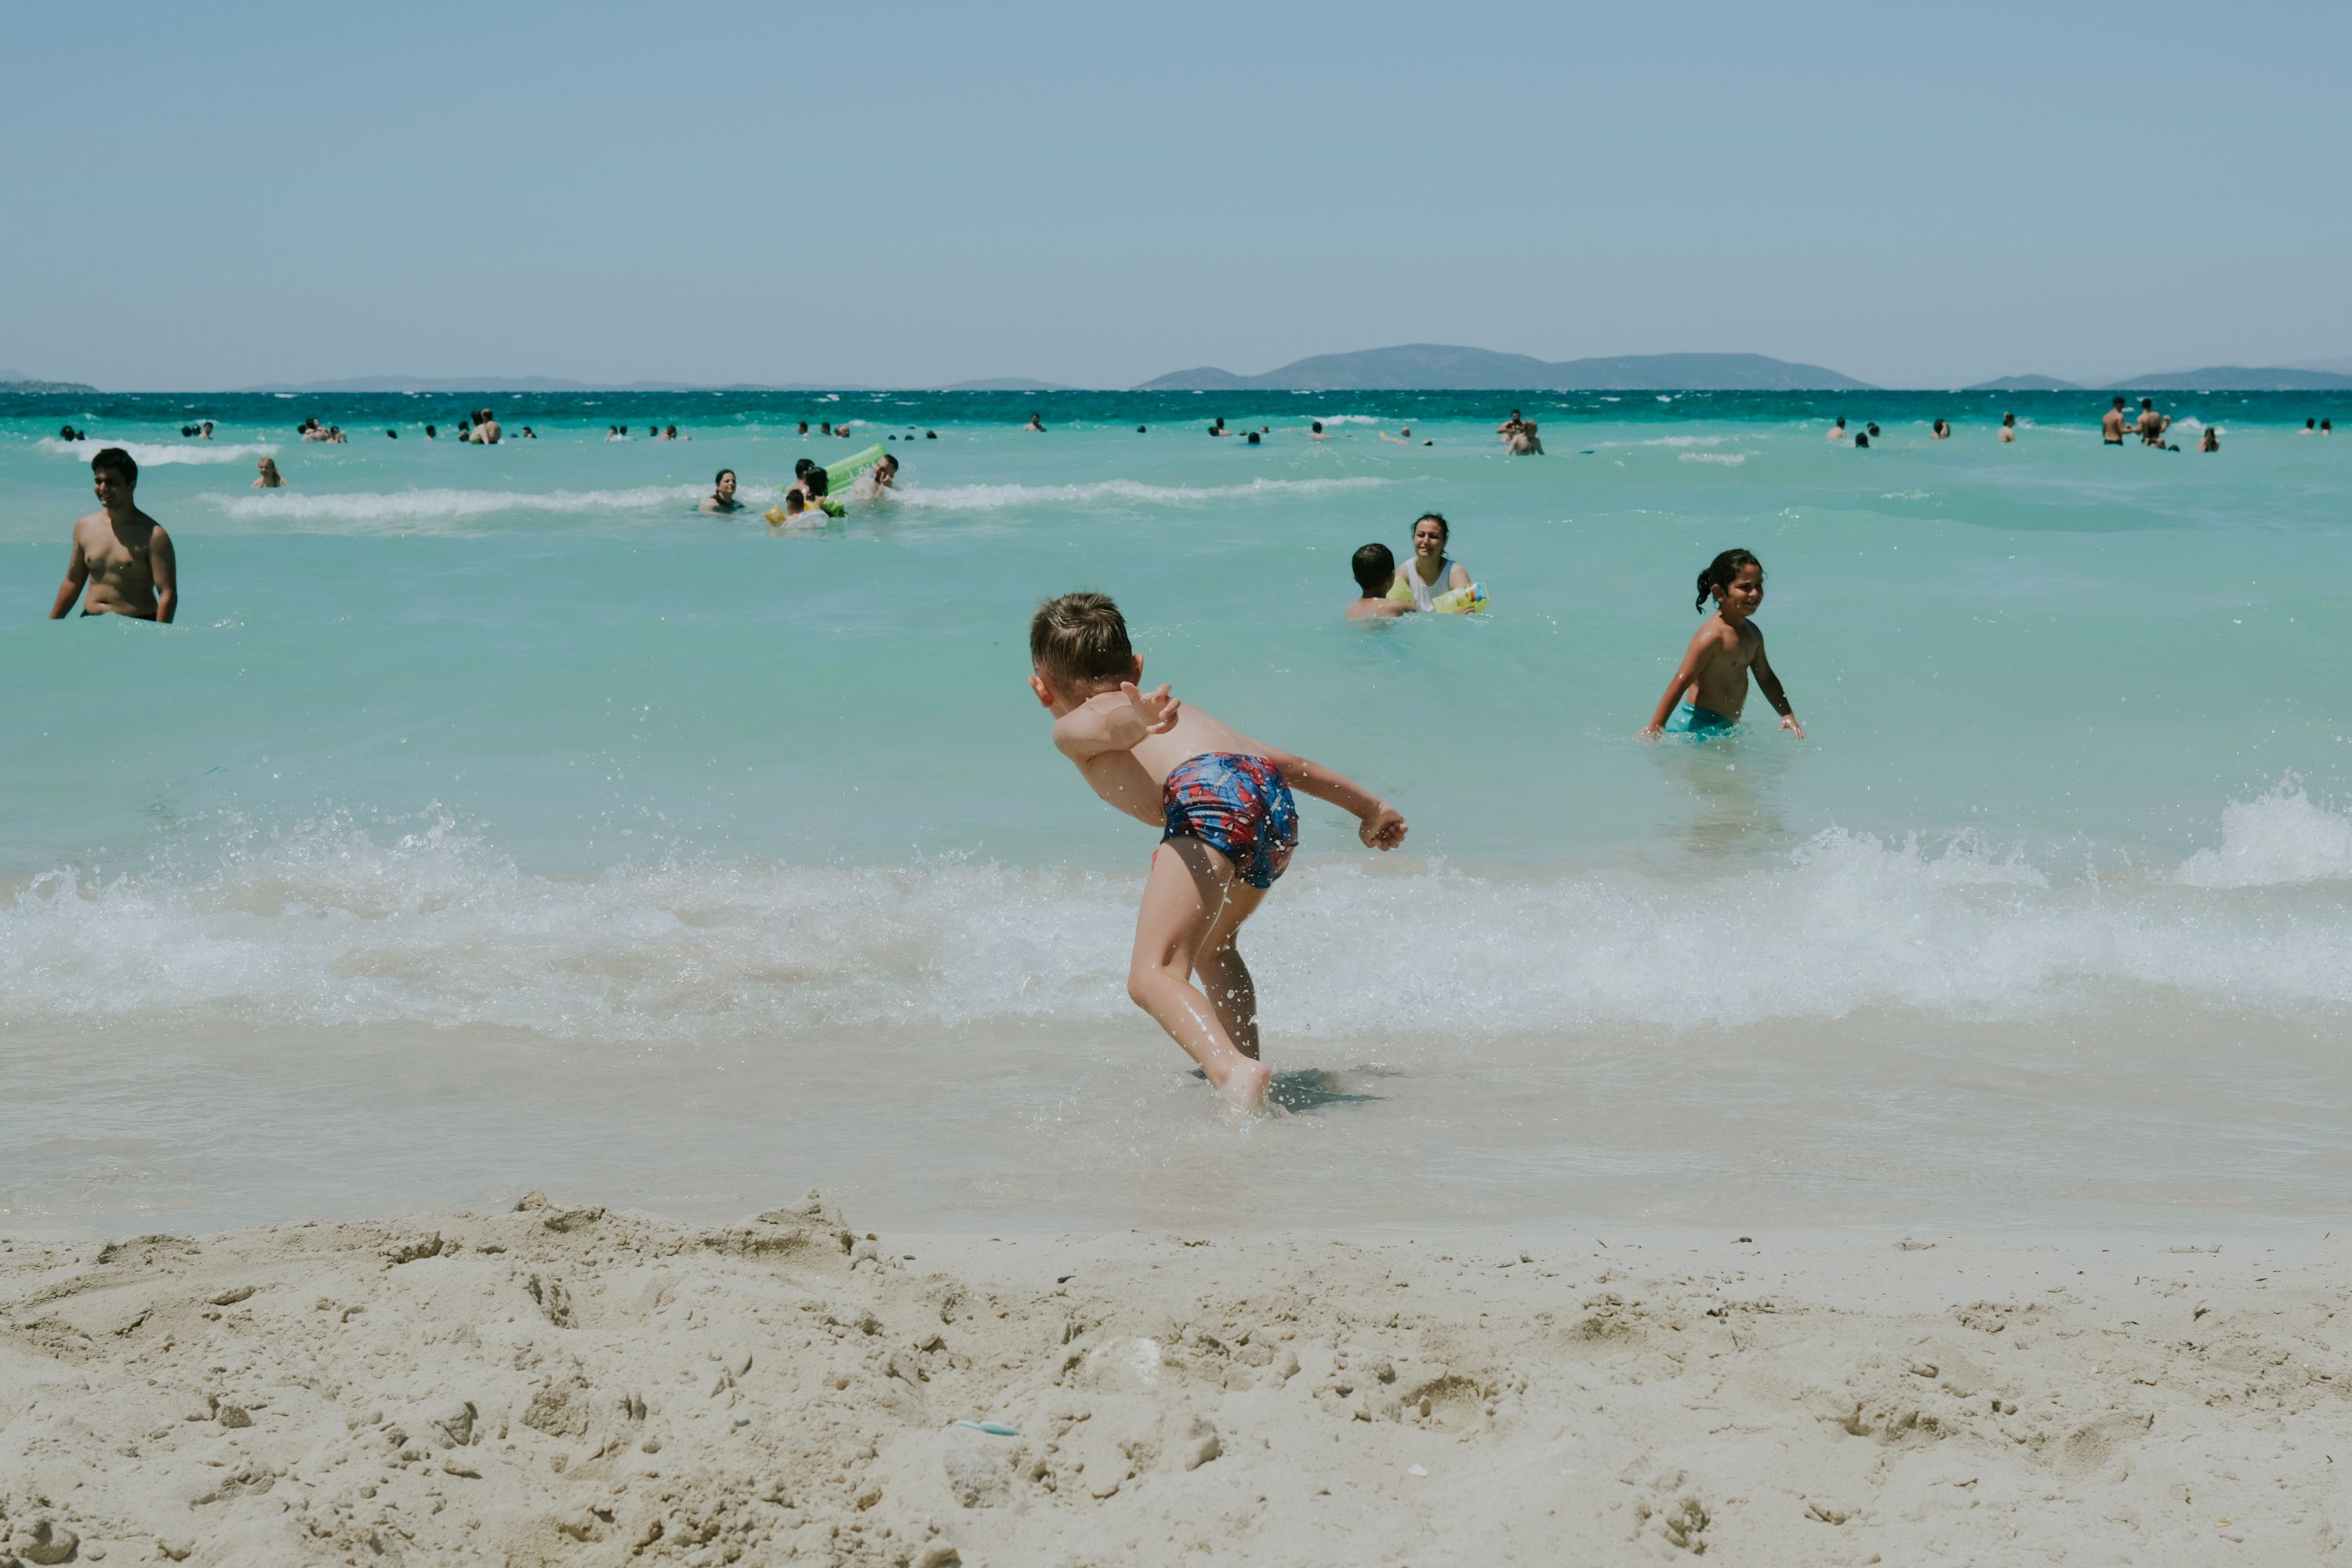 Is a term-time holiday really a crime?